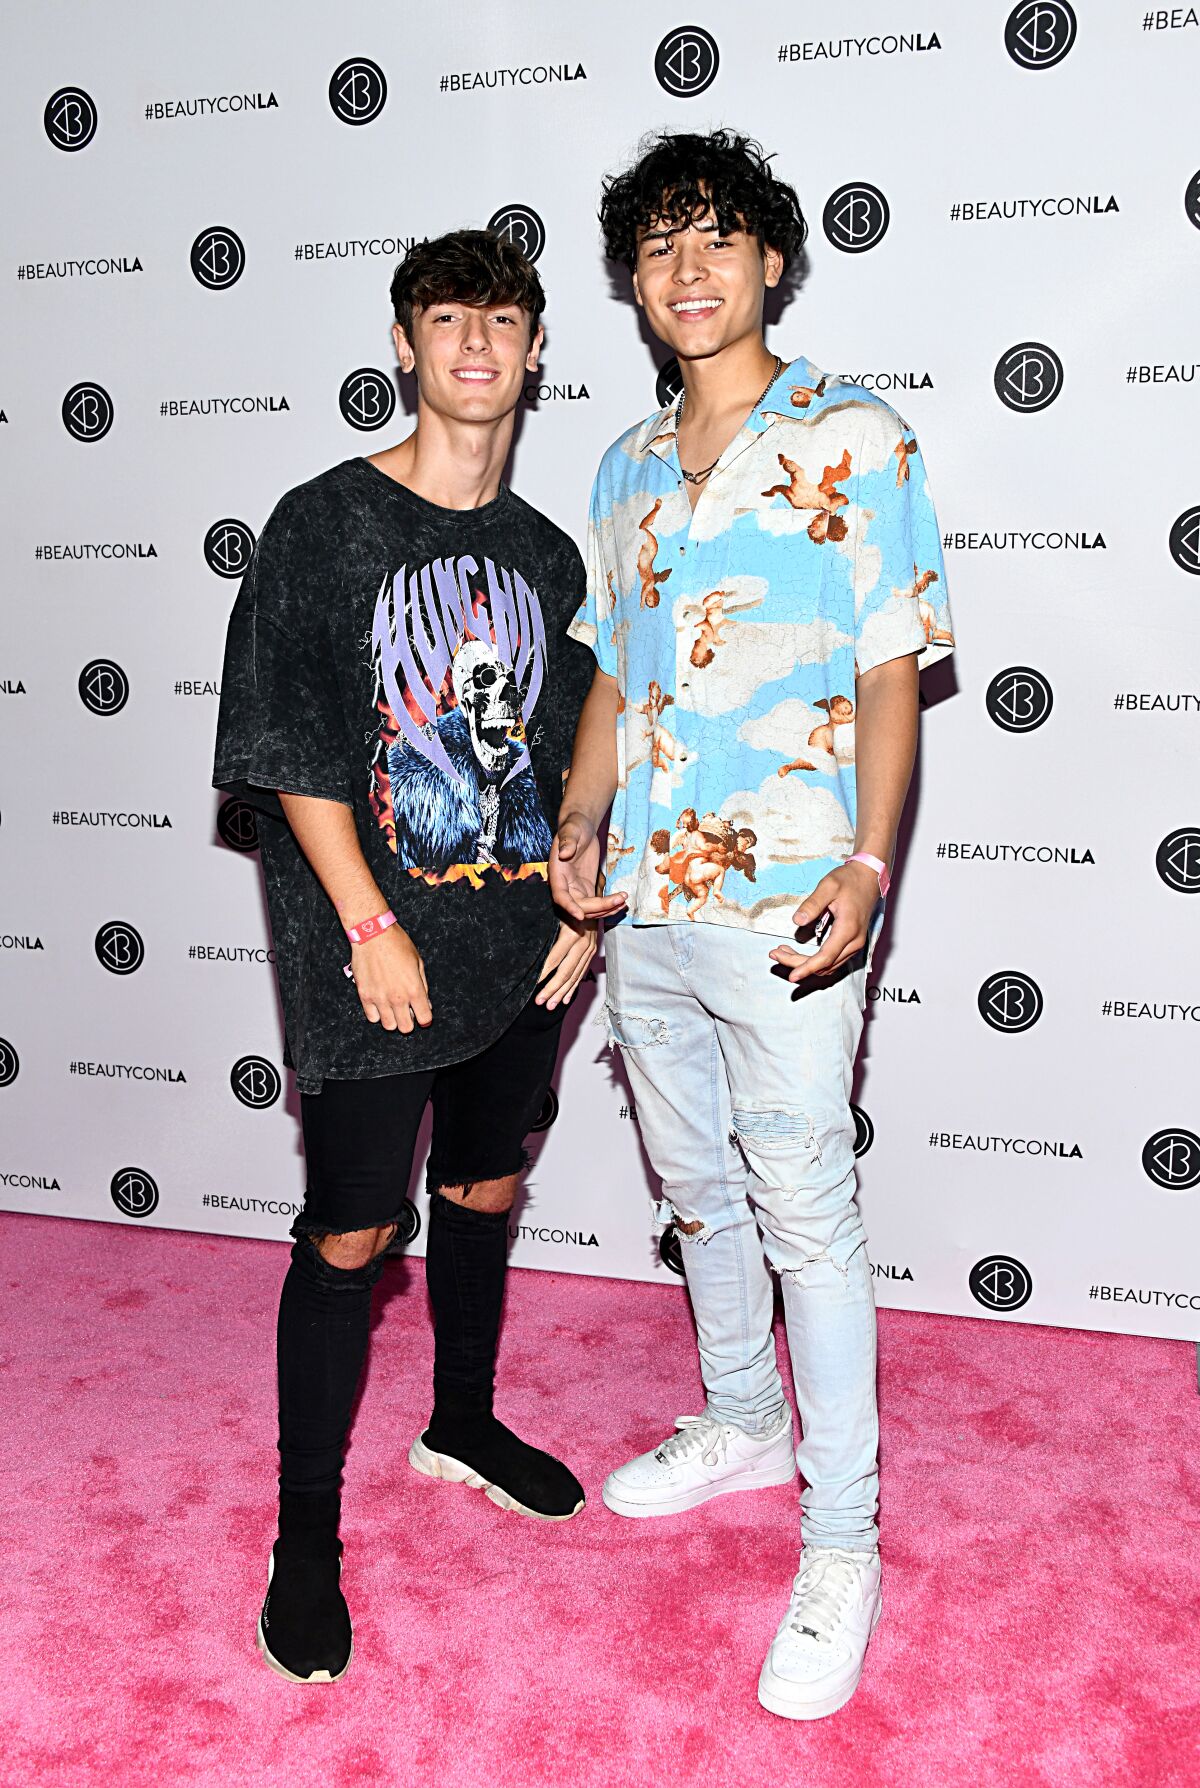 TikTok "influencer" Bryce Hall, left, reportedly threw a party in the Hollywood Hills that resulted in a visit by police.